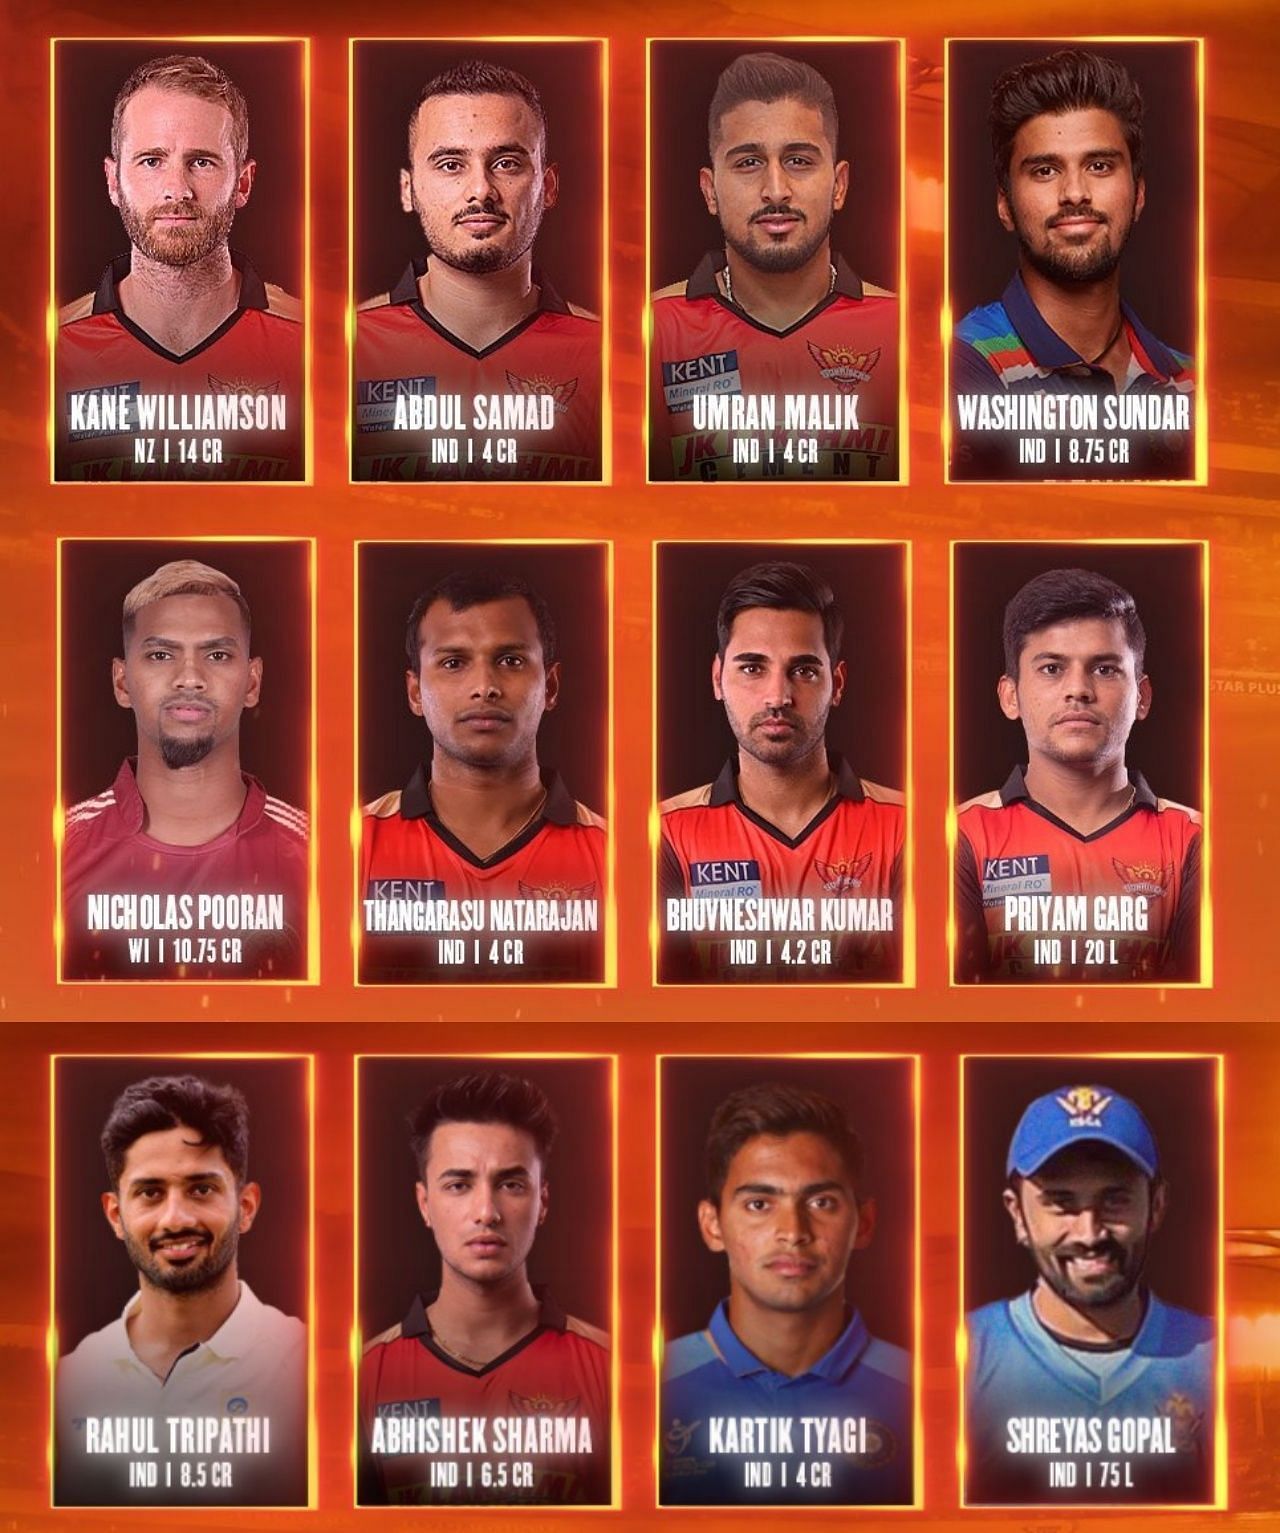 Some members of the Sunrisers Hyderabad squad for IPL 2022. Pic: SRH/ Twitter